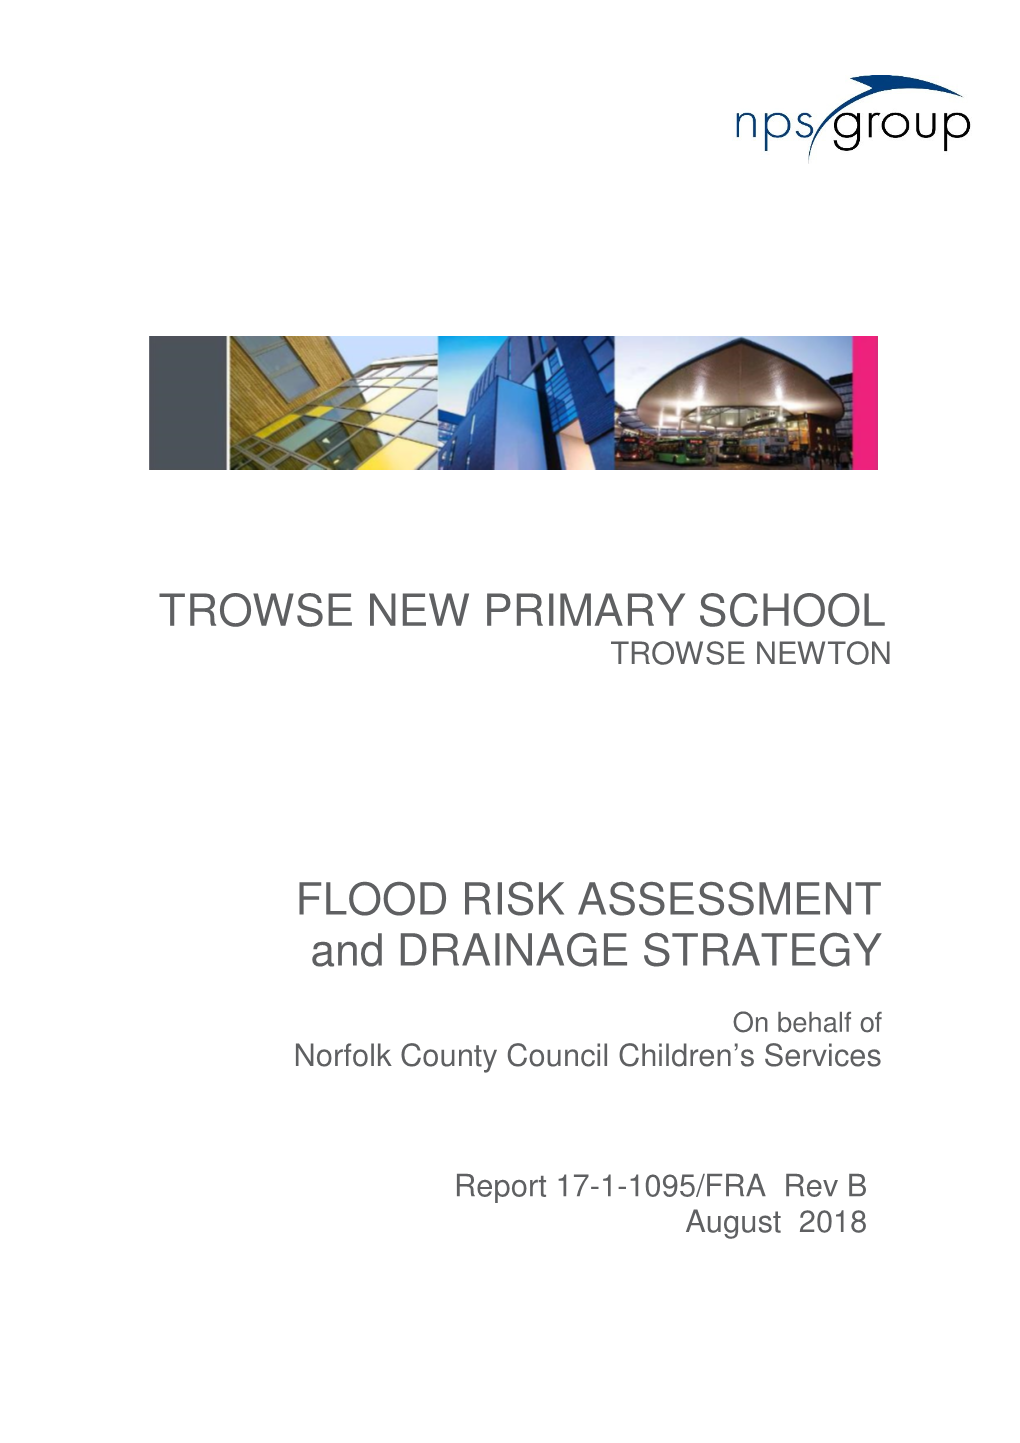 TROWSE NEW PRIMARY SCHOOL FLOOD RISK ASSESSMENT And